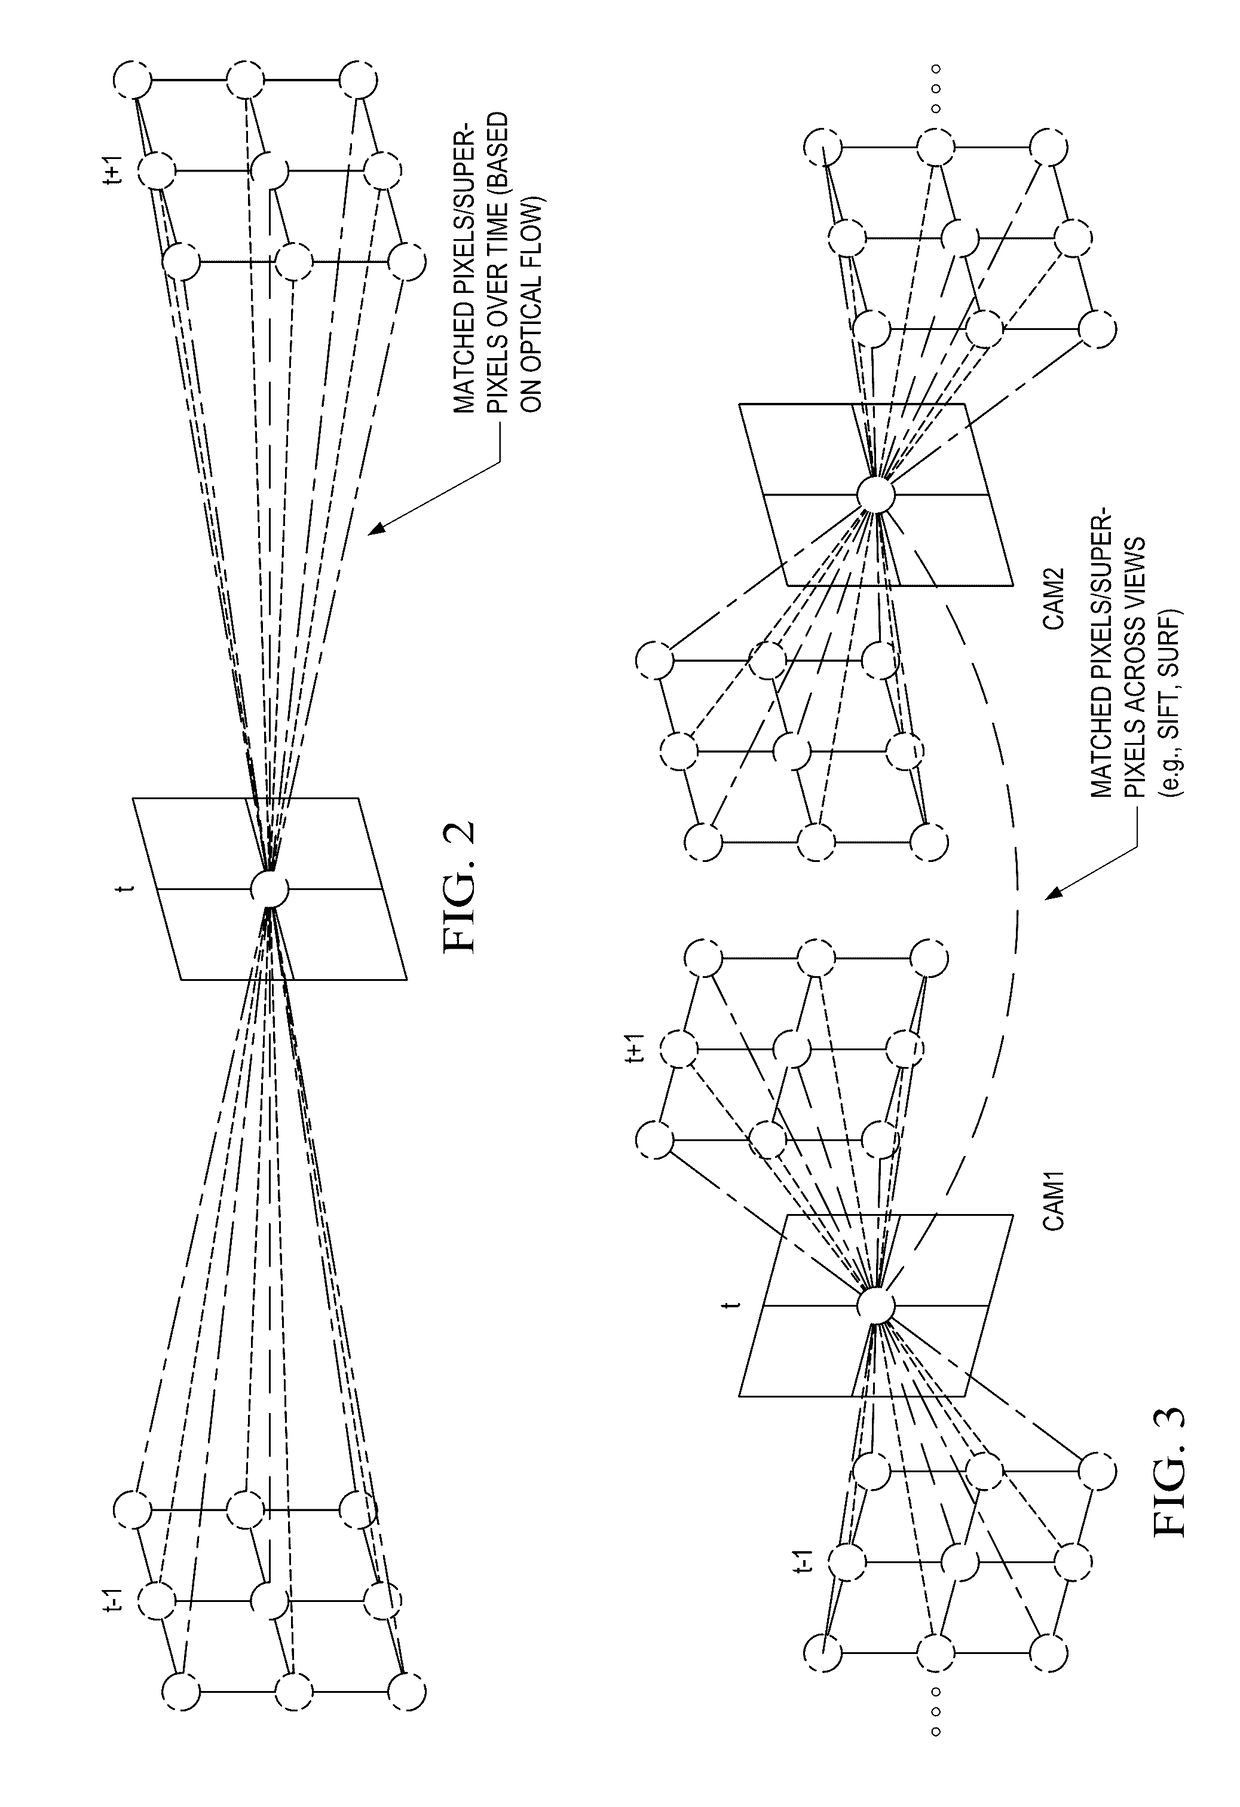 Apparatus and Methods for Video Foreground-Background Segmentation with Multi-View Spatial Temporal Graph Cuts